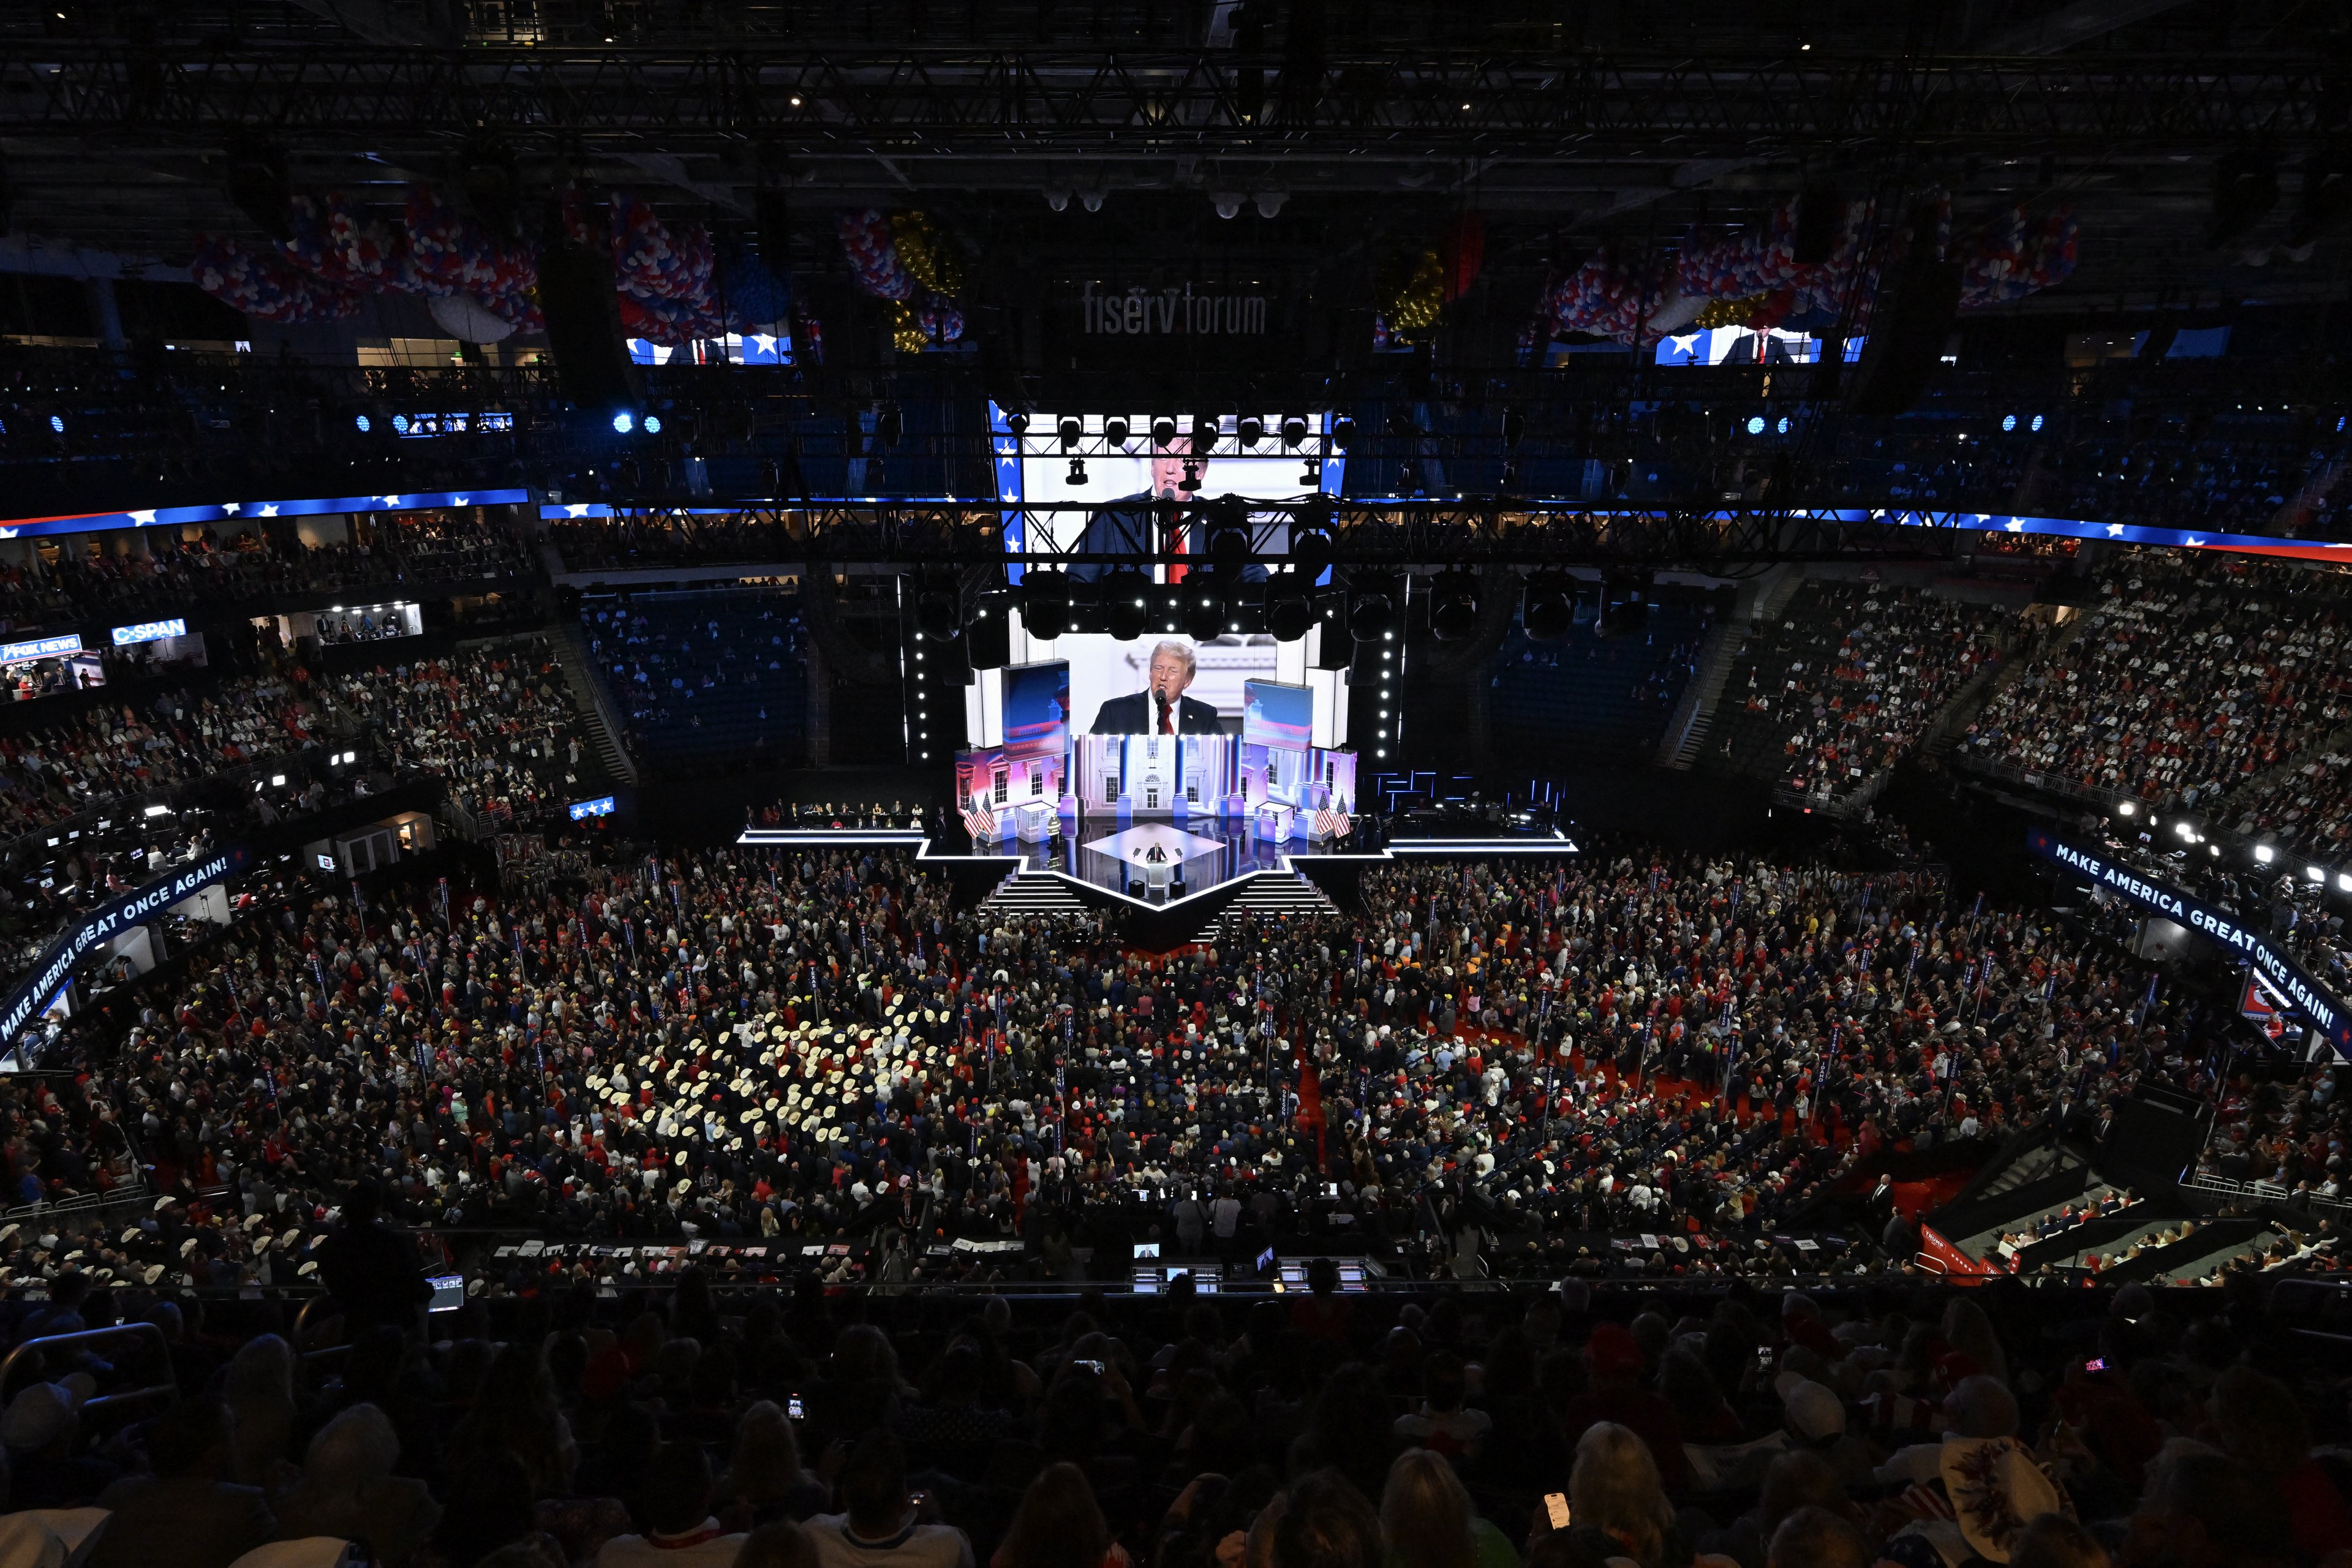 Day 4 - Republican Party presidential nominating convention